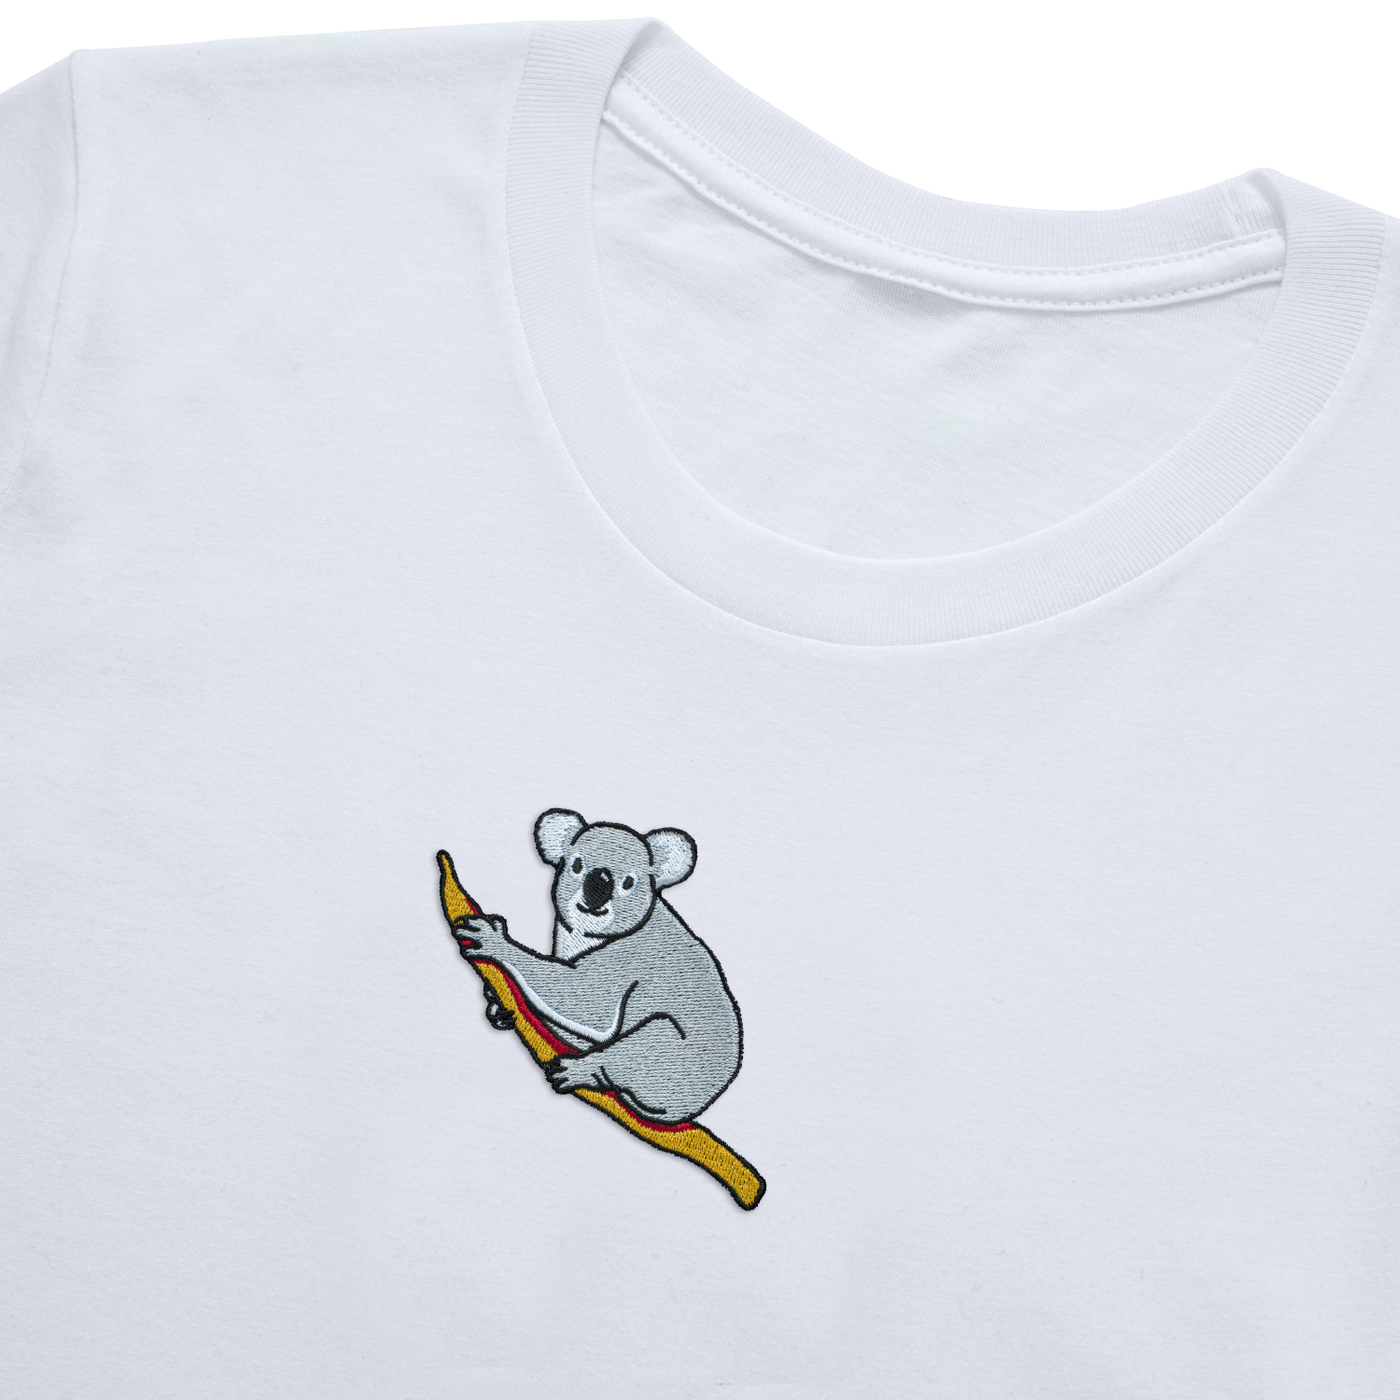 Bobby's Planet Women's Embroidered Koala T-Shirt from Australia Down Under Animals Collection in White Color#color_white